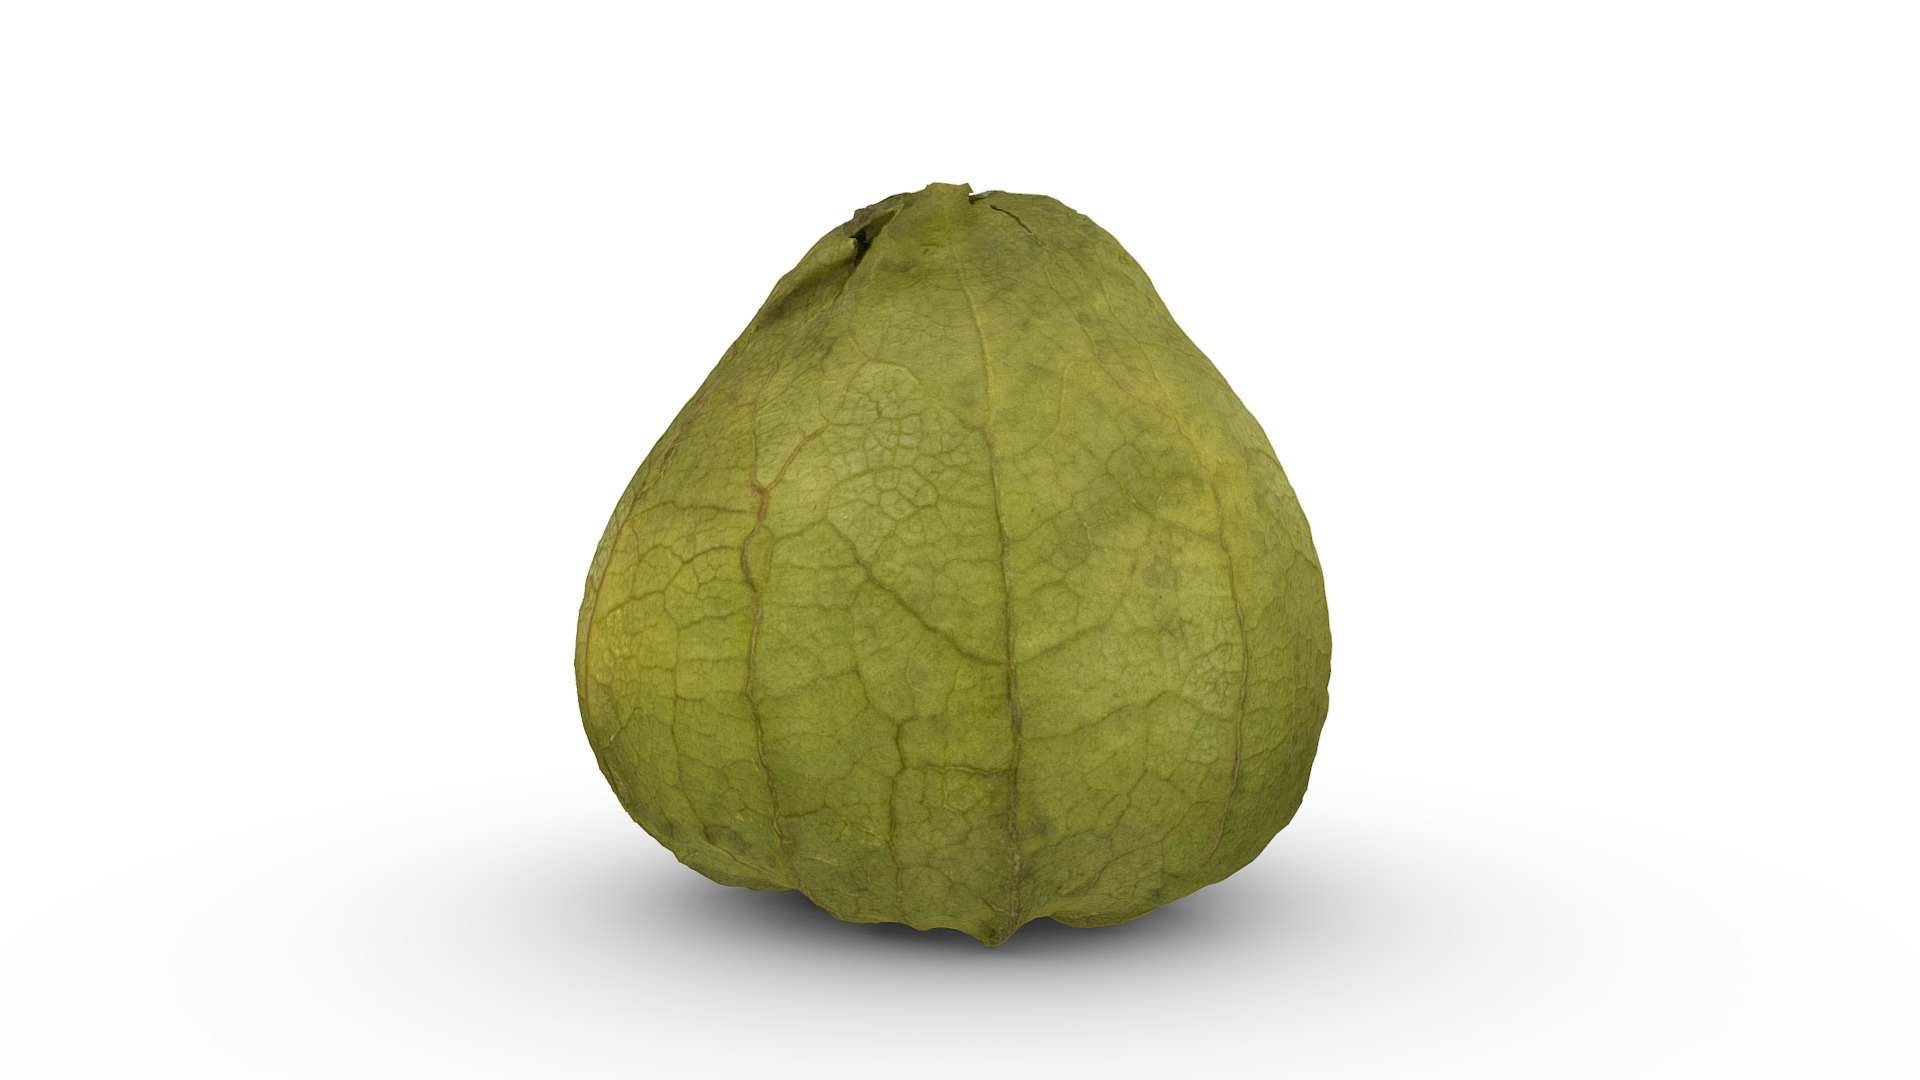 3D model Tomatillo - This is a 3D model of the Tomatillo. The 3D model is about a green watermelon on a white background.